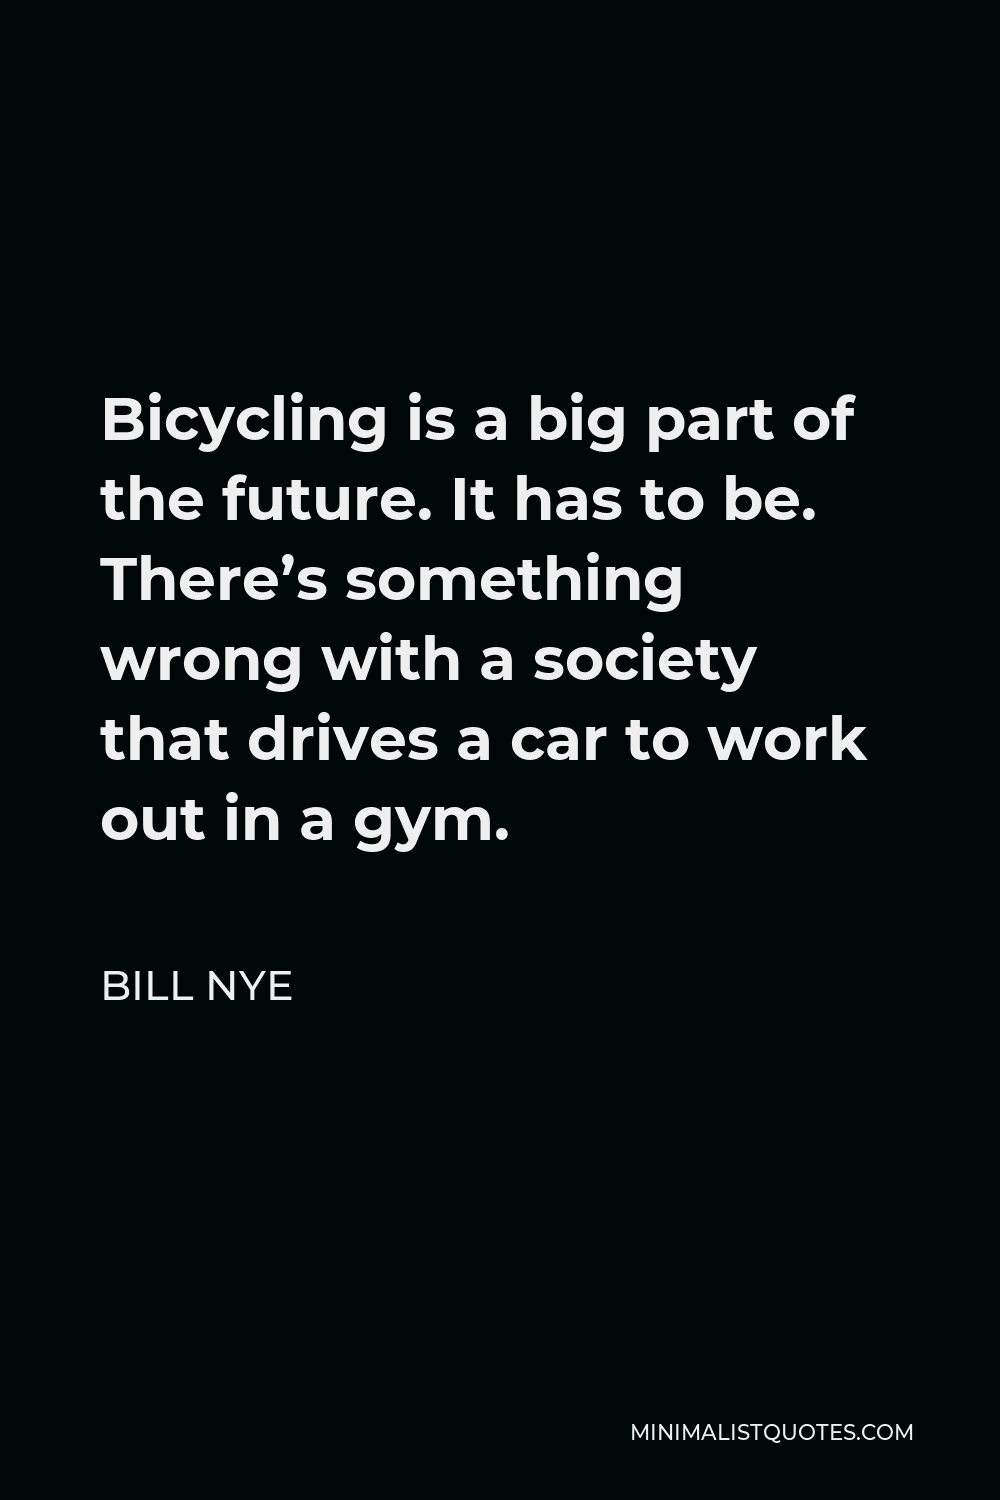 Bill Nye Quote - Bicycling is a big part of the future. It has to be. There’s something wrong with a society that drives a car to work out in a gym.